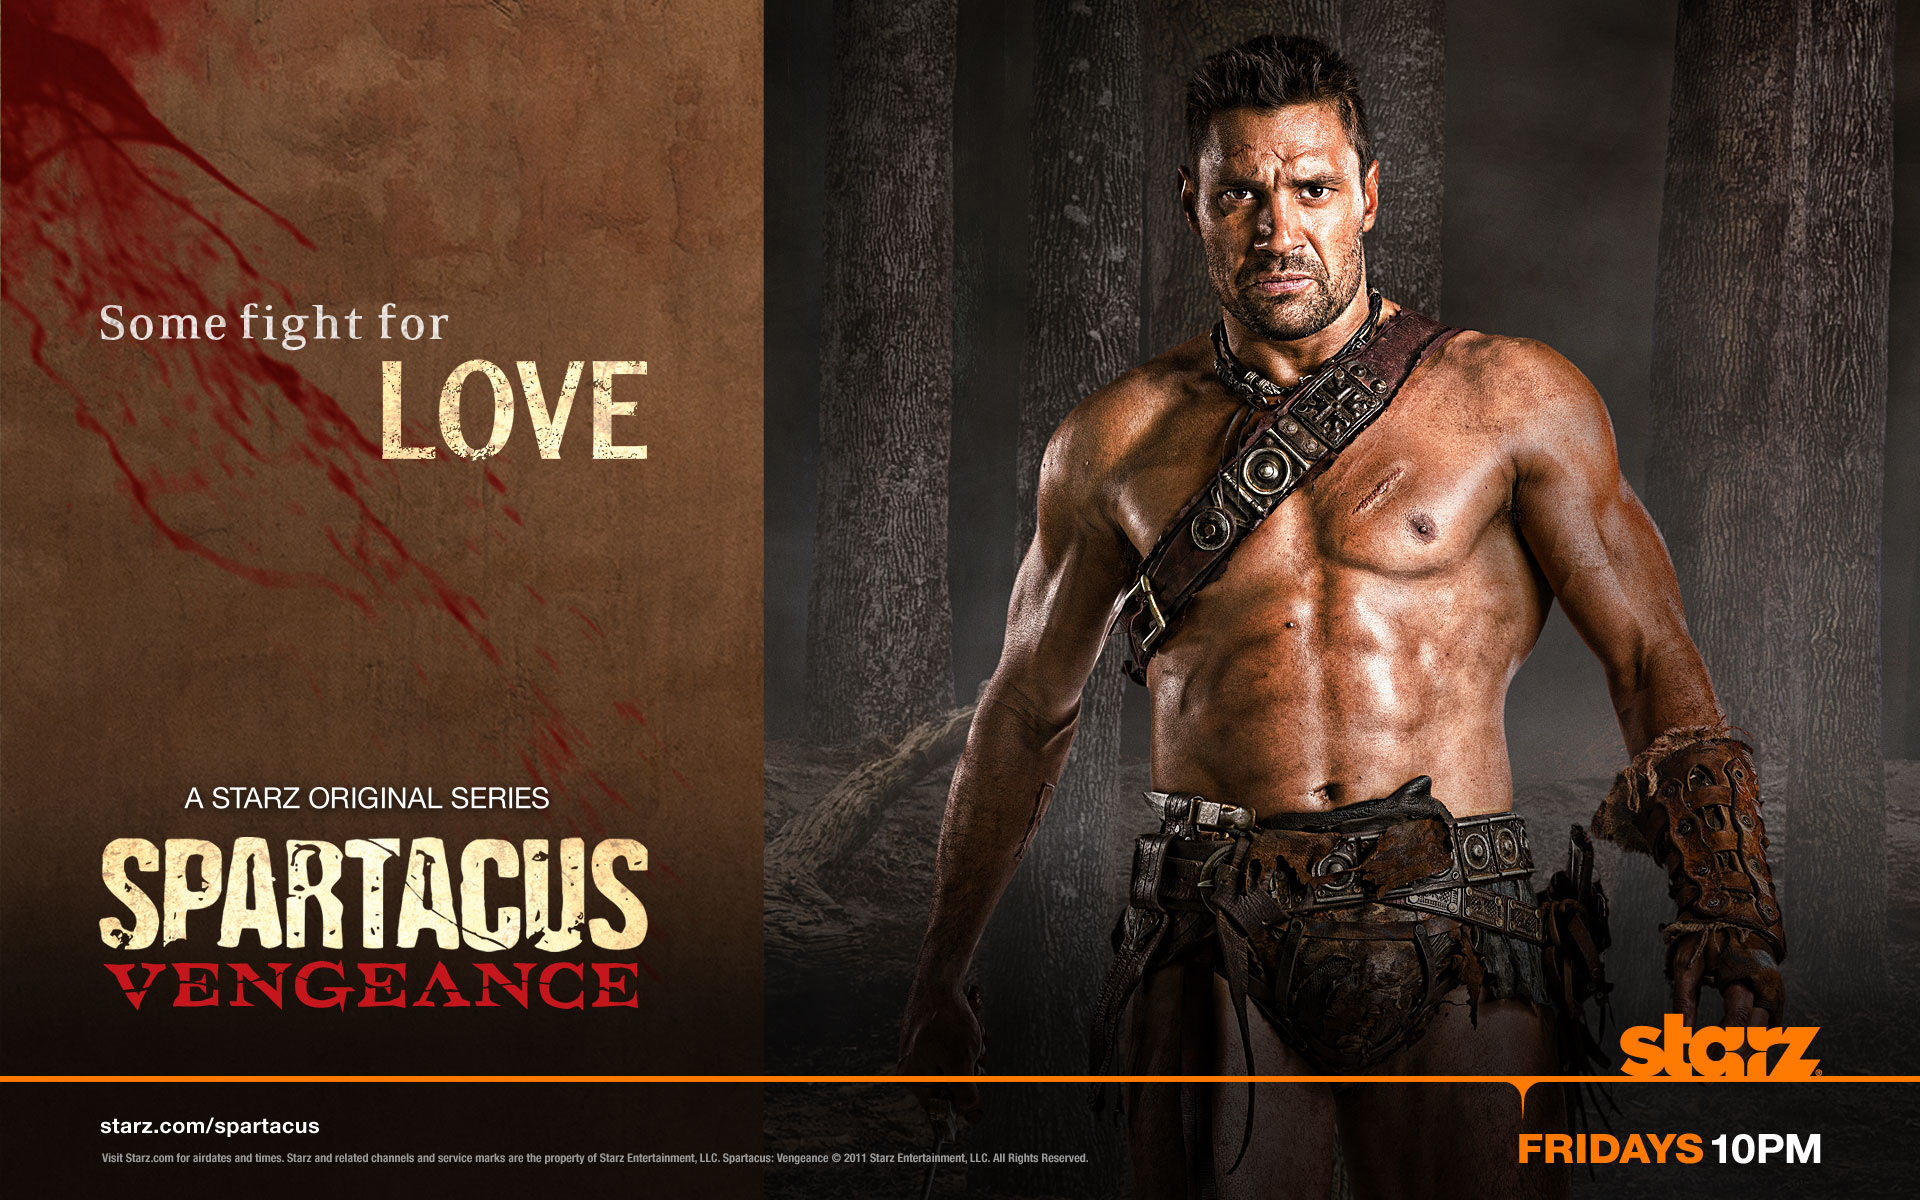 Crixus Fights For Love In Exclusive Spartacus Vengeance Image